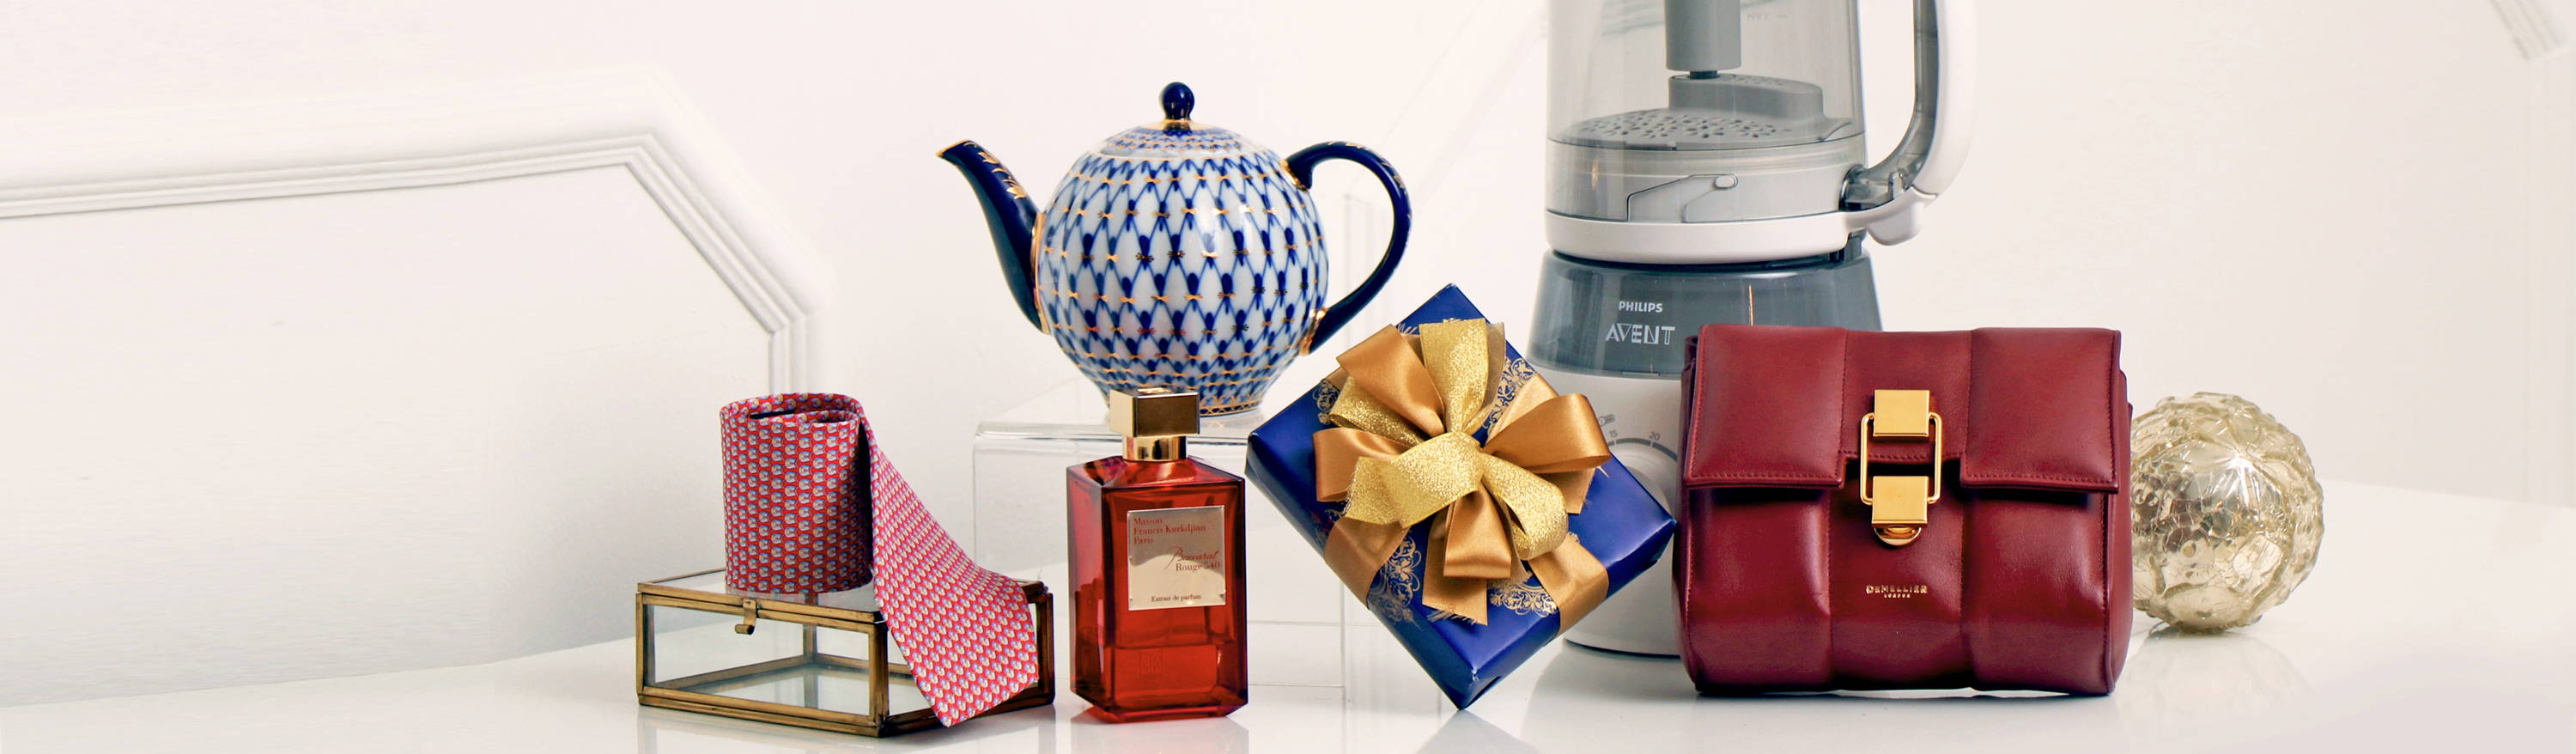 Opulent Gifts—An Extraordinary Christmas Gift Guide